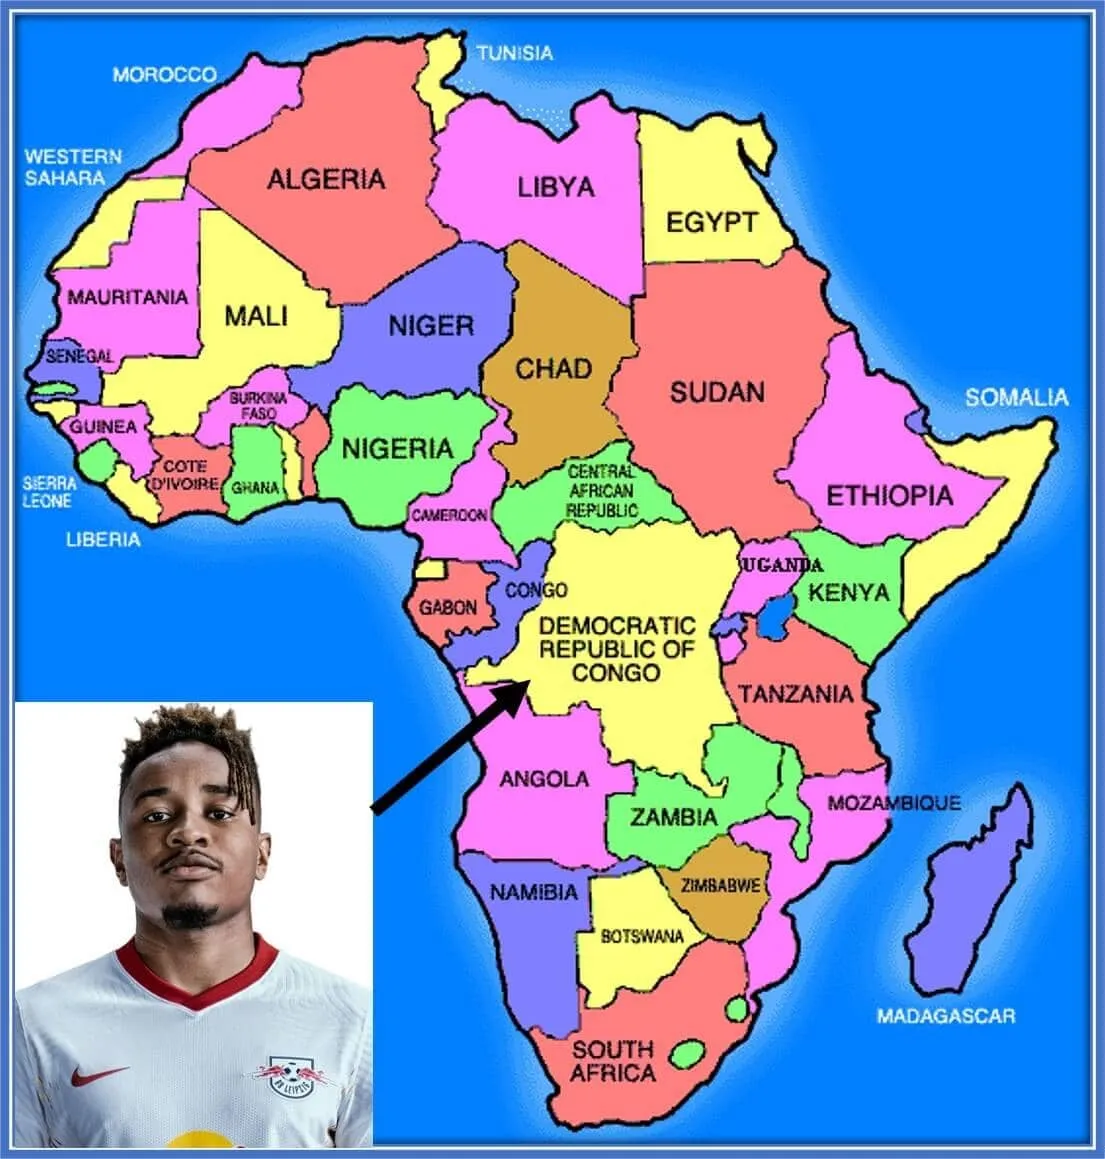 This is a map of Africa, and the arrow points to his family's place of origin.